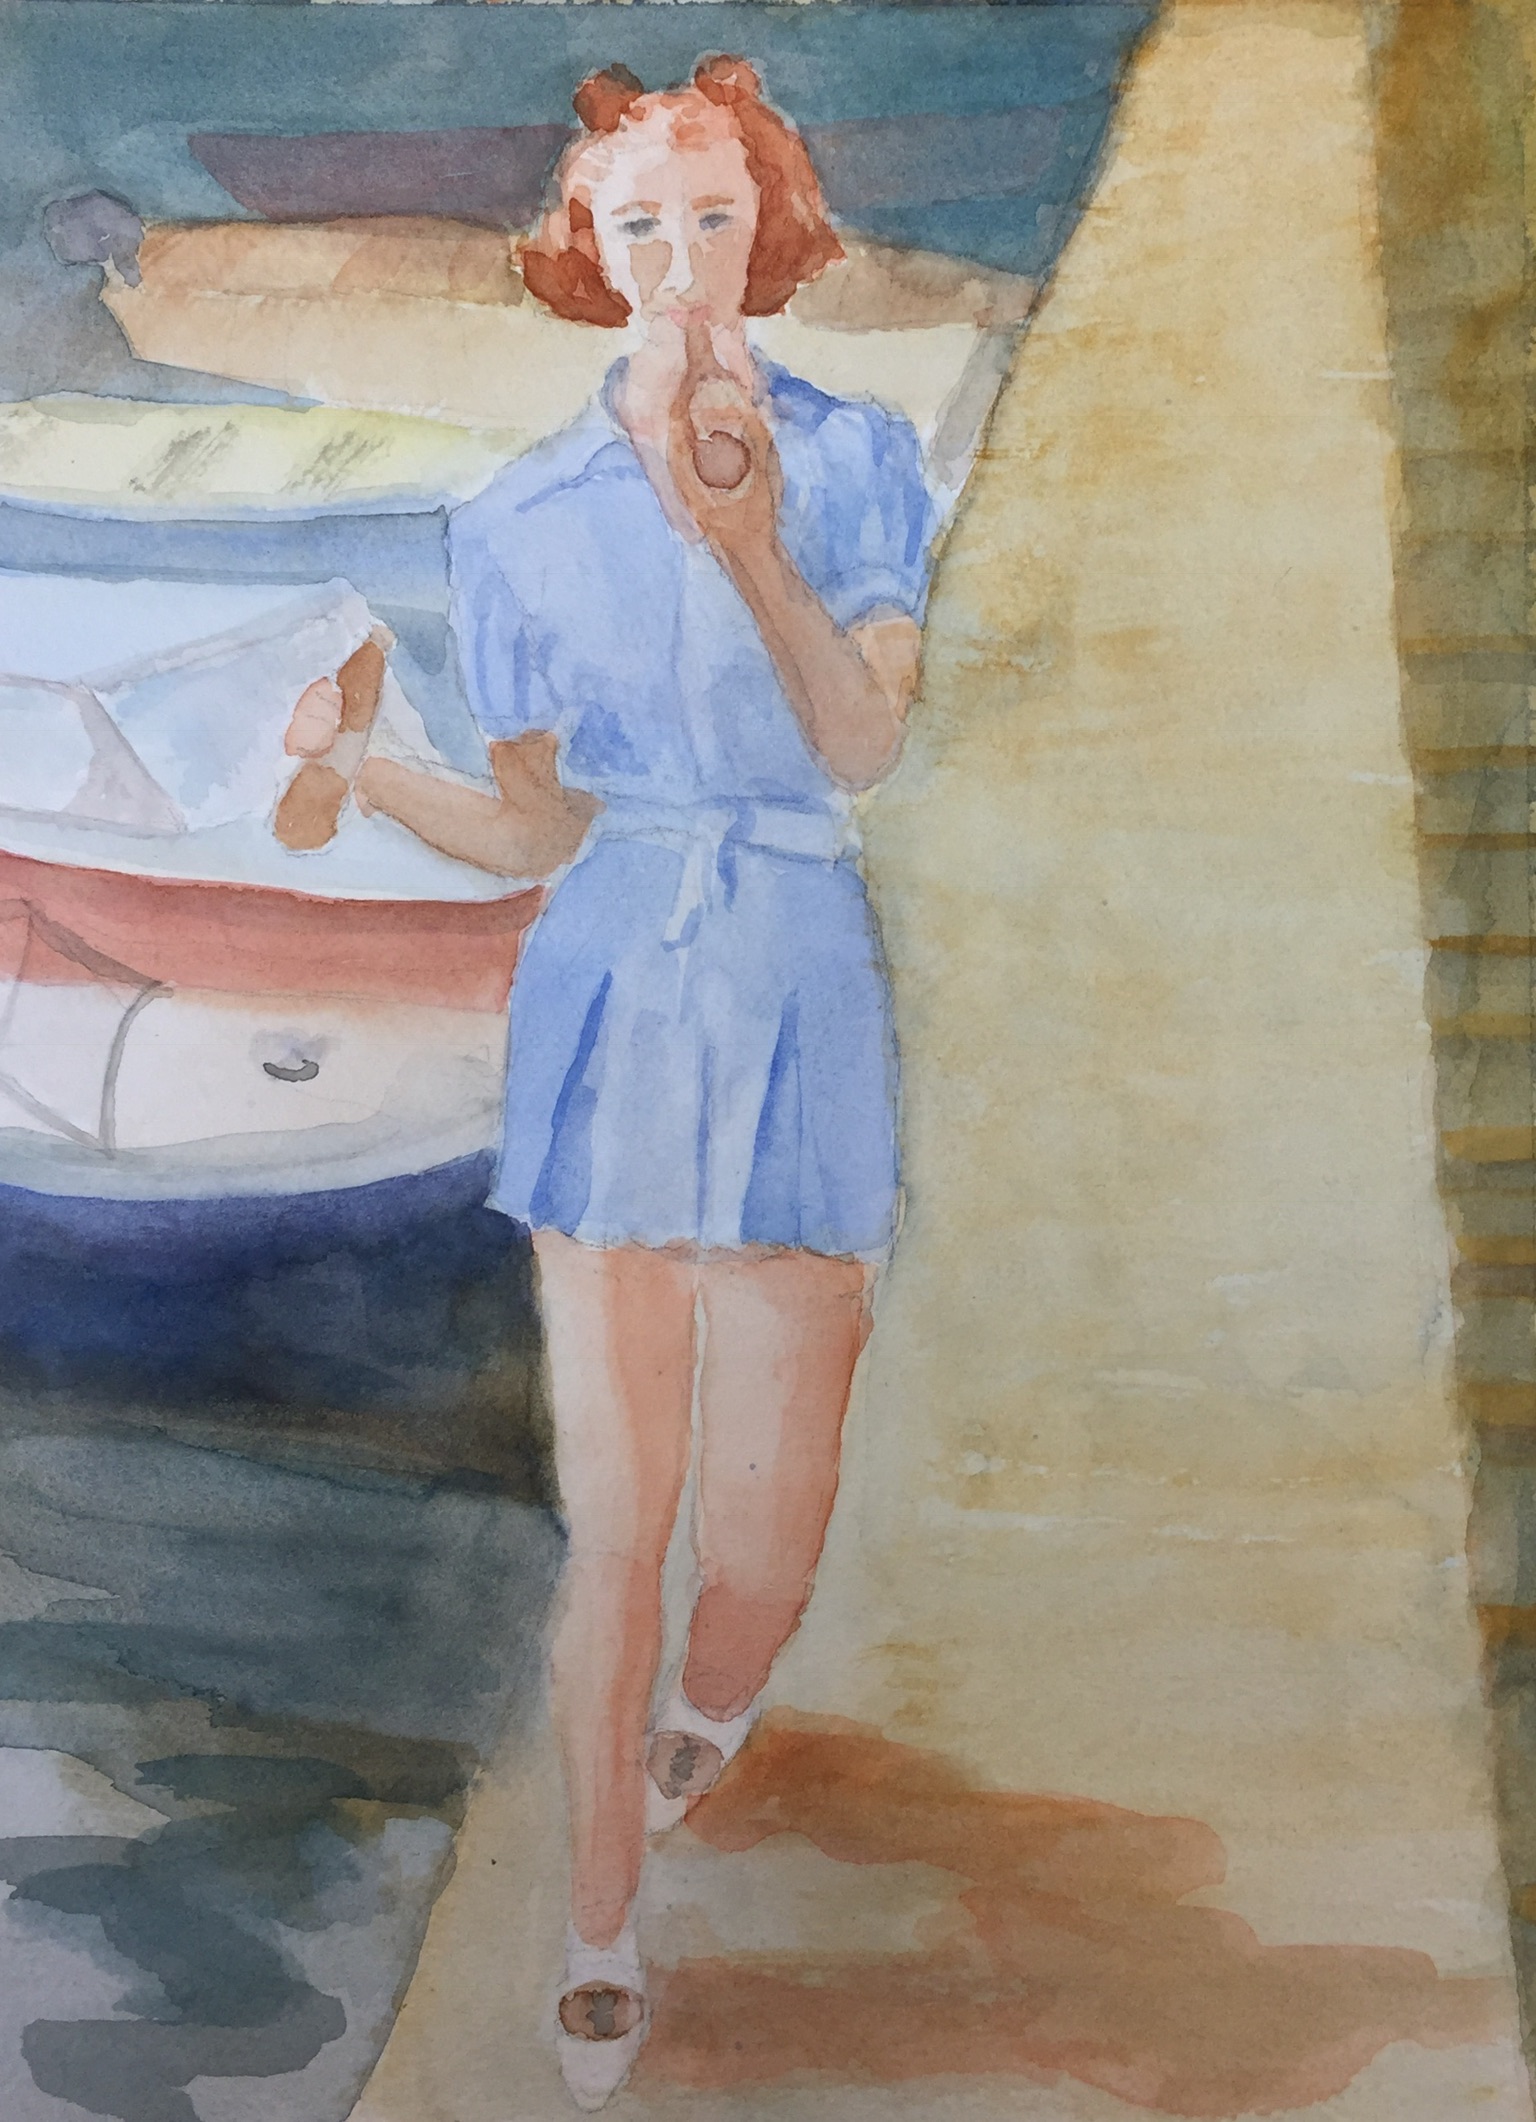 Cold Beer by Peggy Odgers.  Watercolor on paper.